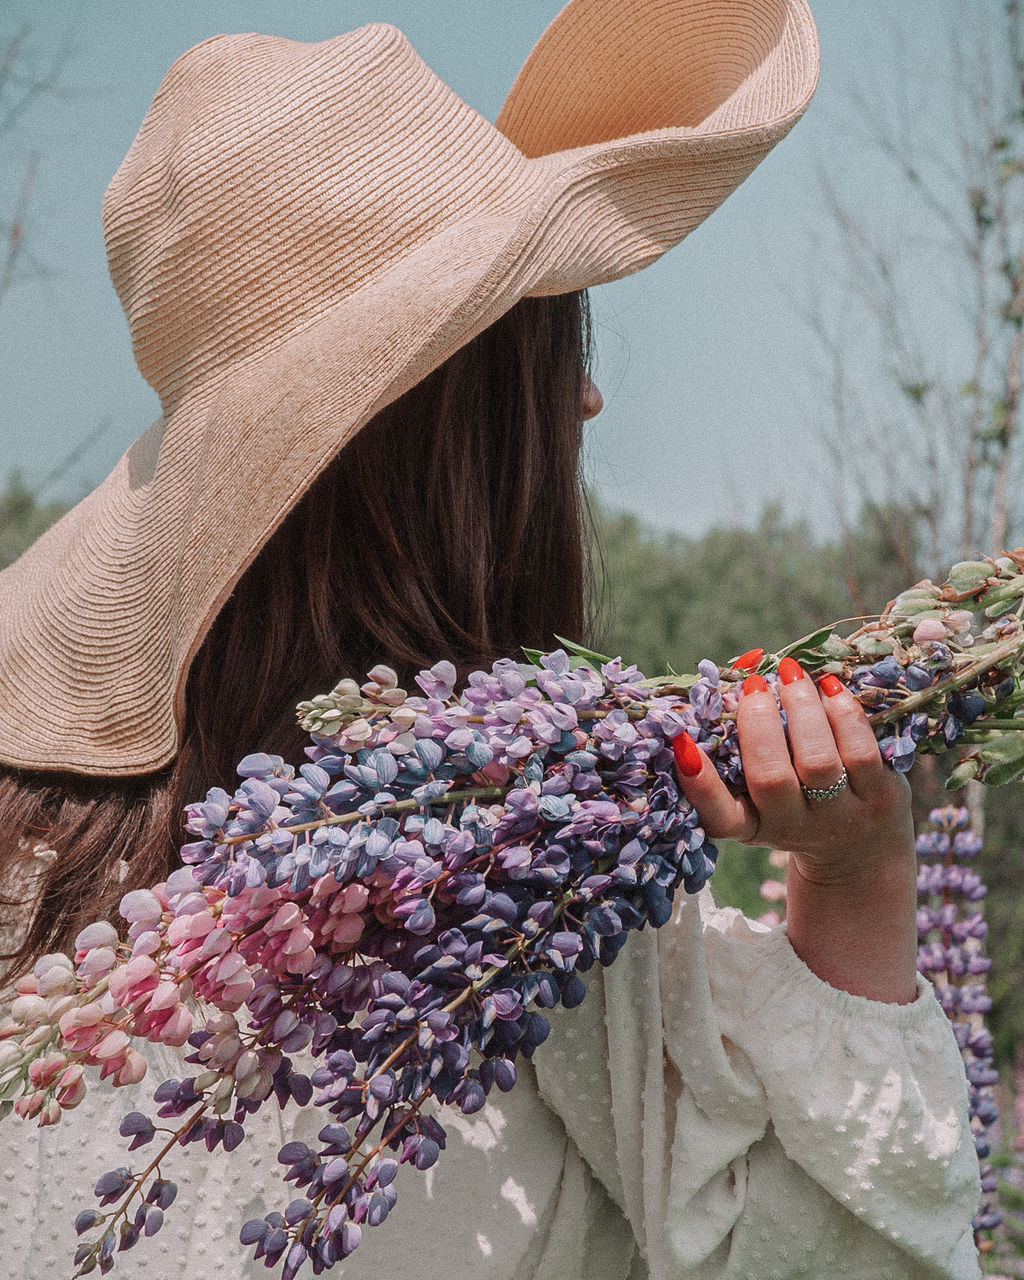 one person, women, spring, adult, clothing, fashion accessory, hat, art, flower, nature, plant, straw hat, lifestyles, day, female, hairstyle, leisure activity, flowering plant, long hair, outdoors, rear view, holding, sun hat, agriculture, waist up, portrait, headshot, young adult